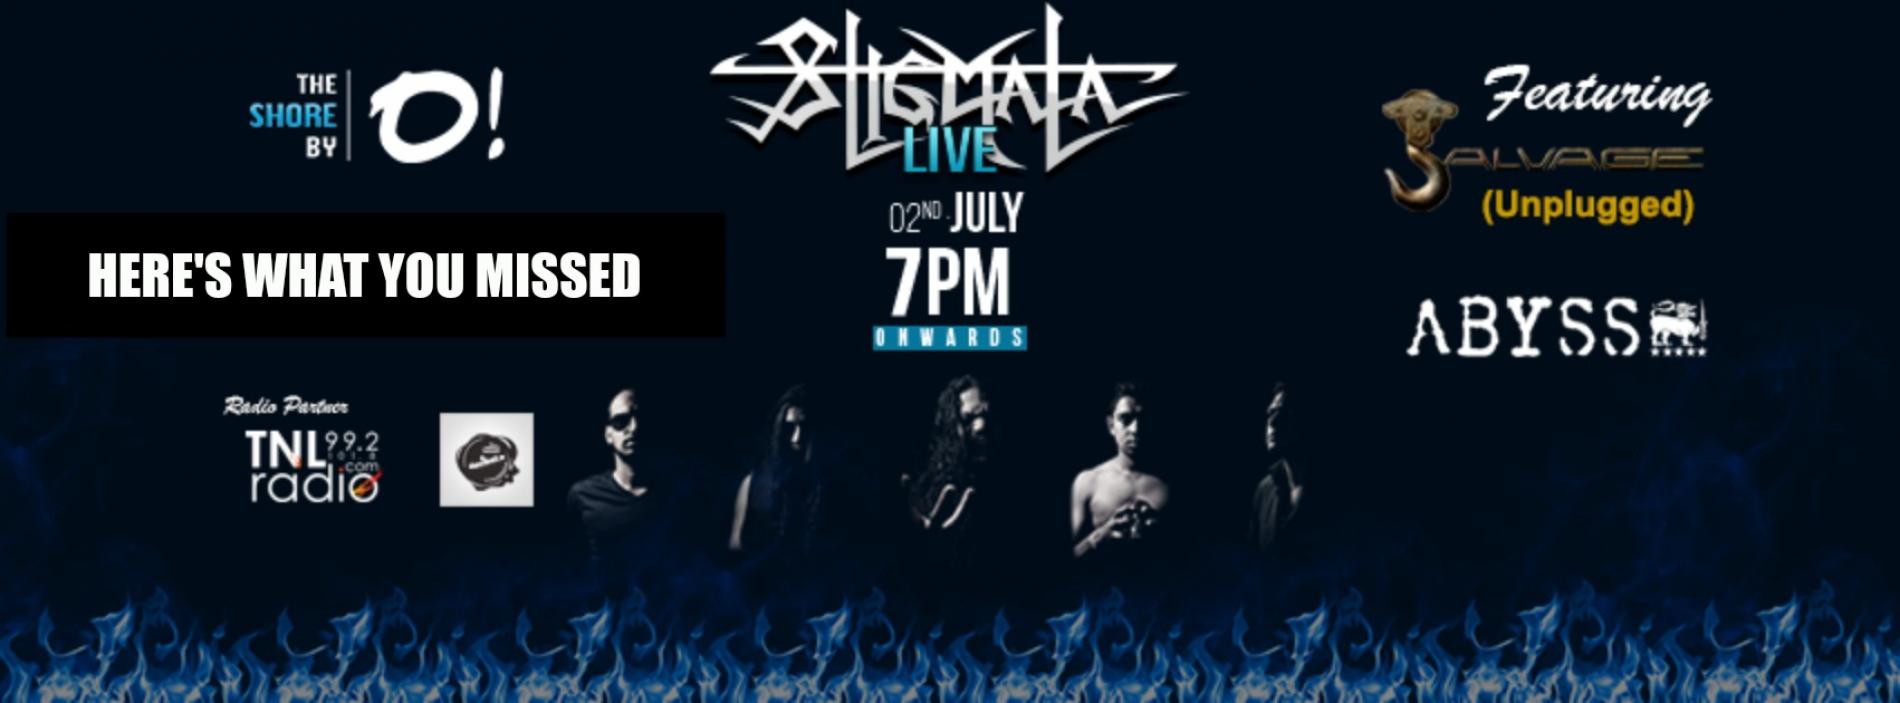 Stigmata Live @ The Shore By O! Here’ What You Missed